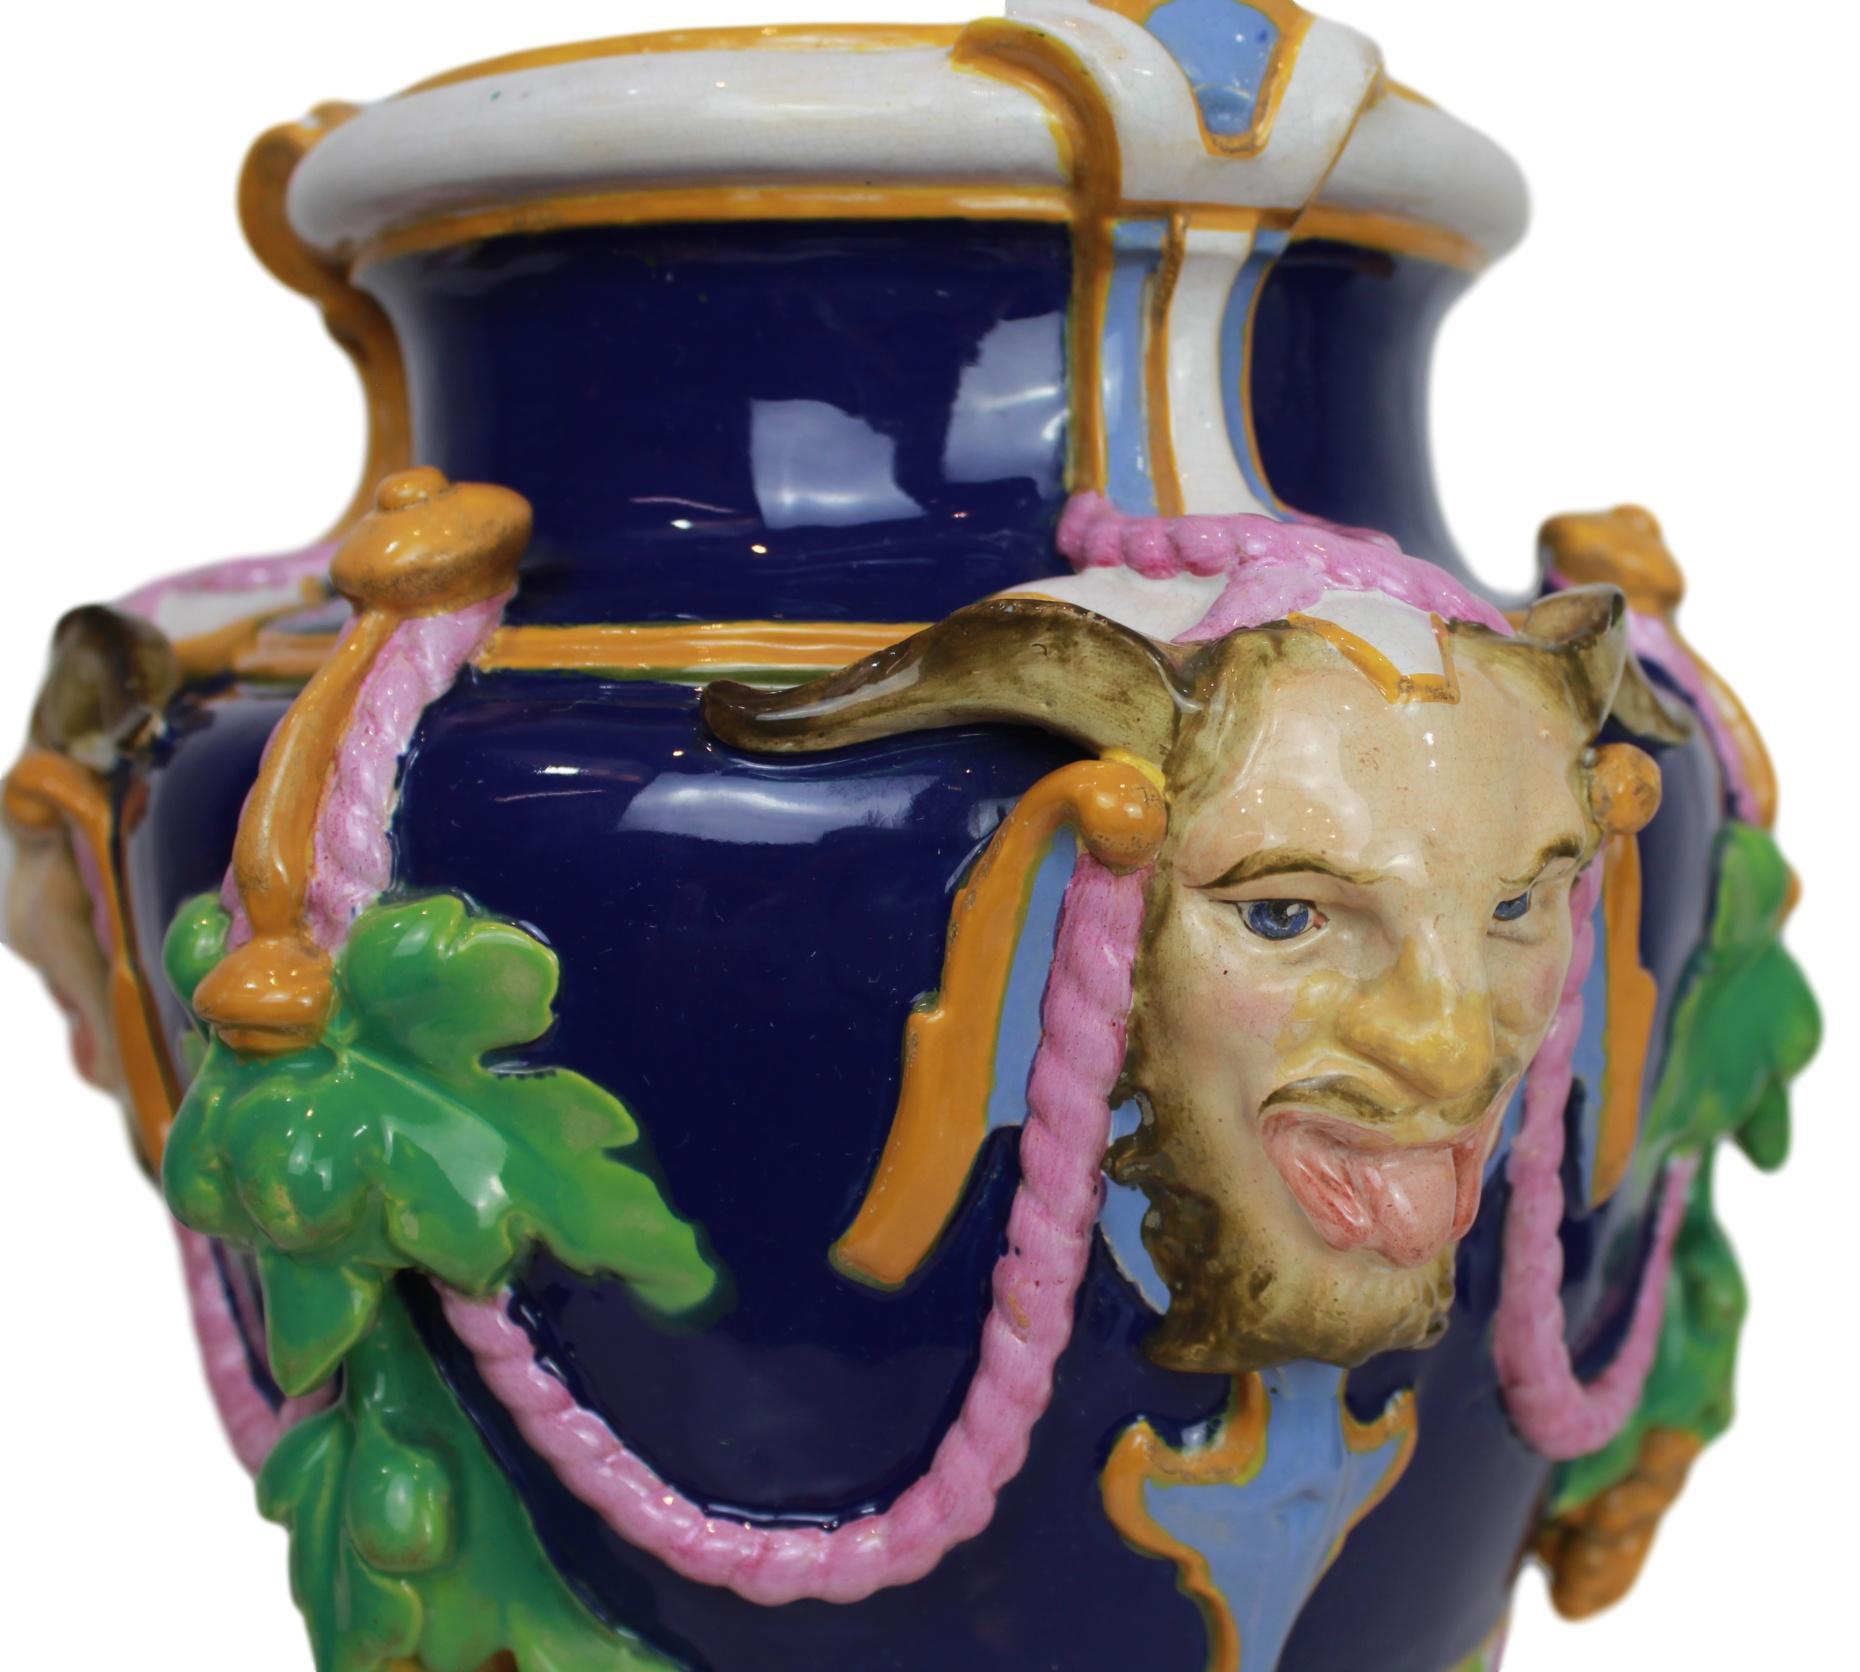 Minton Majolica 'Bacchus' vase cobalt blue-ground, English, dated 1856, of urn-shaped form, molded and applied with three satyr masks, and festoons of pendant fruit, suspending rope-twist swags above gadrooned lower section, on pedestal stem and